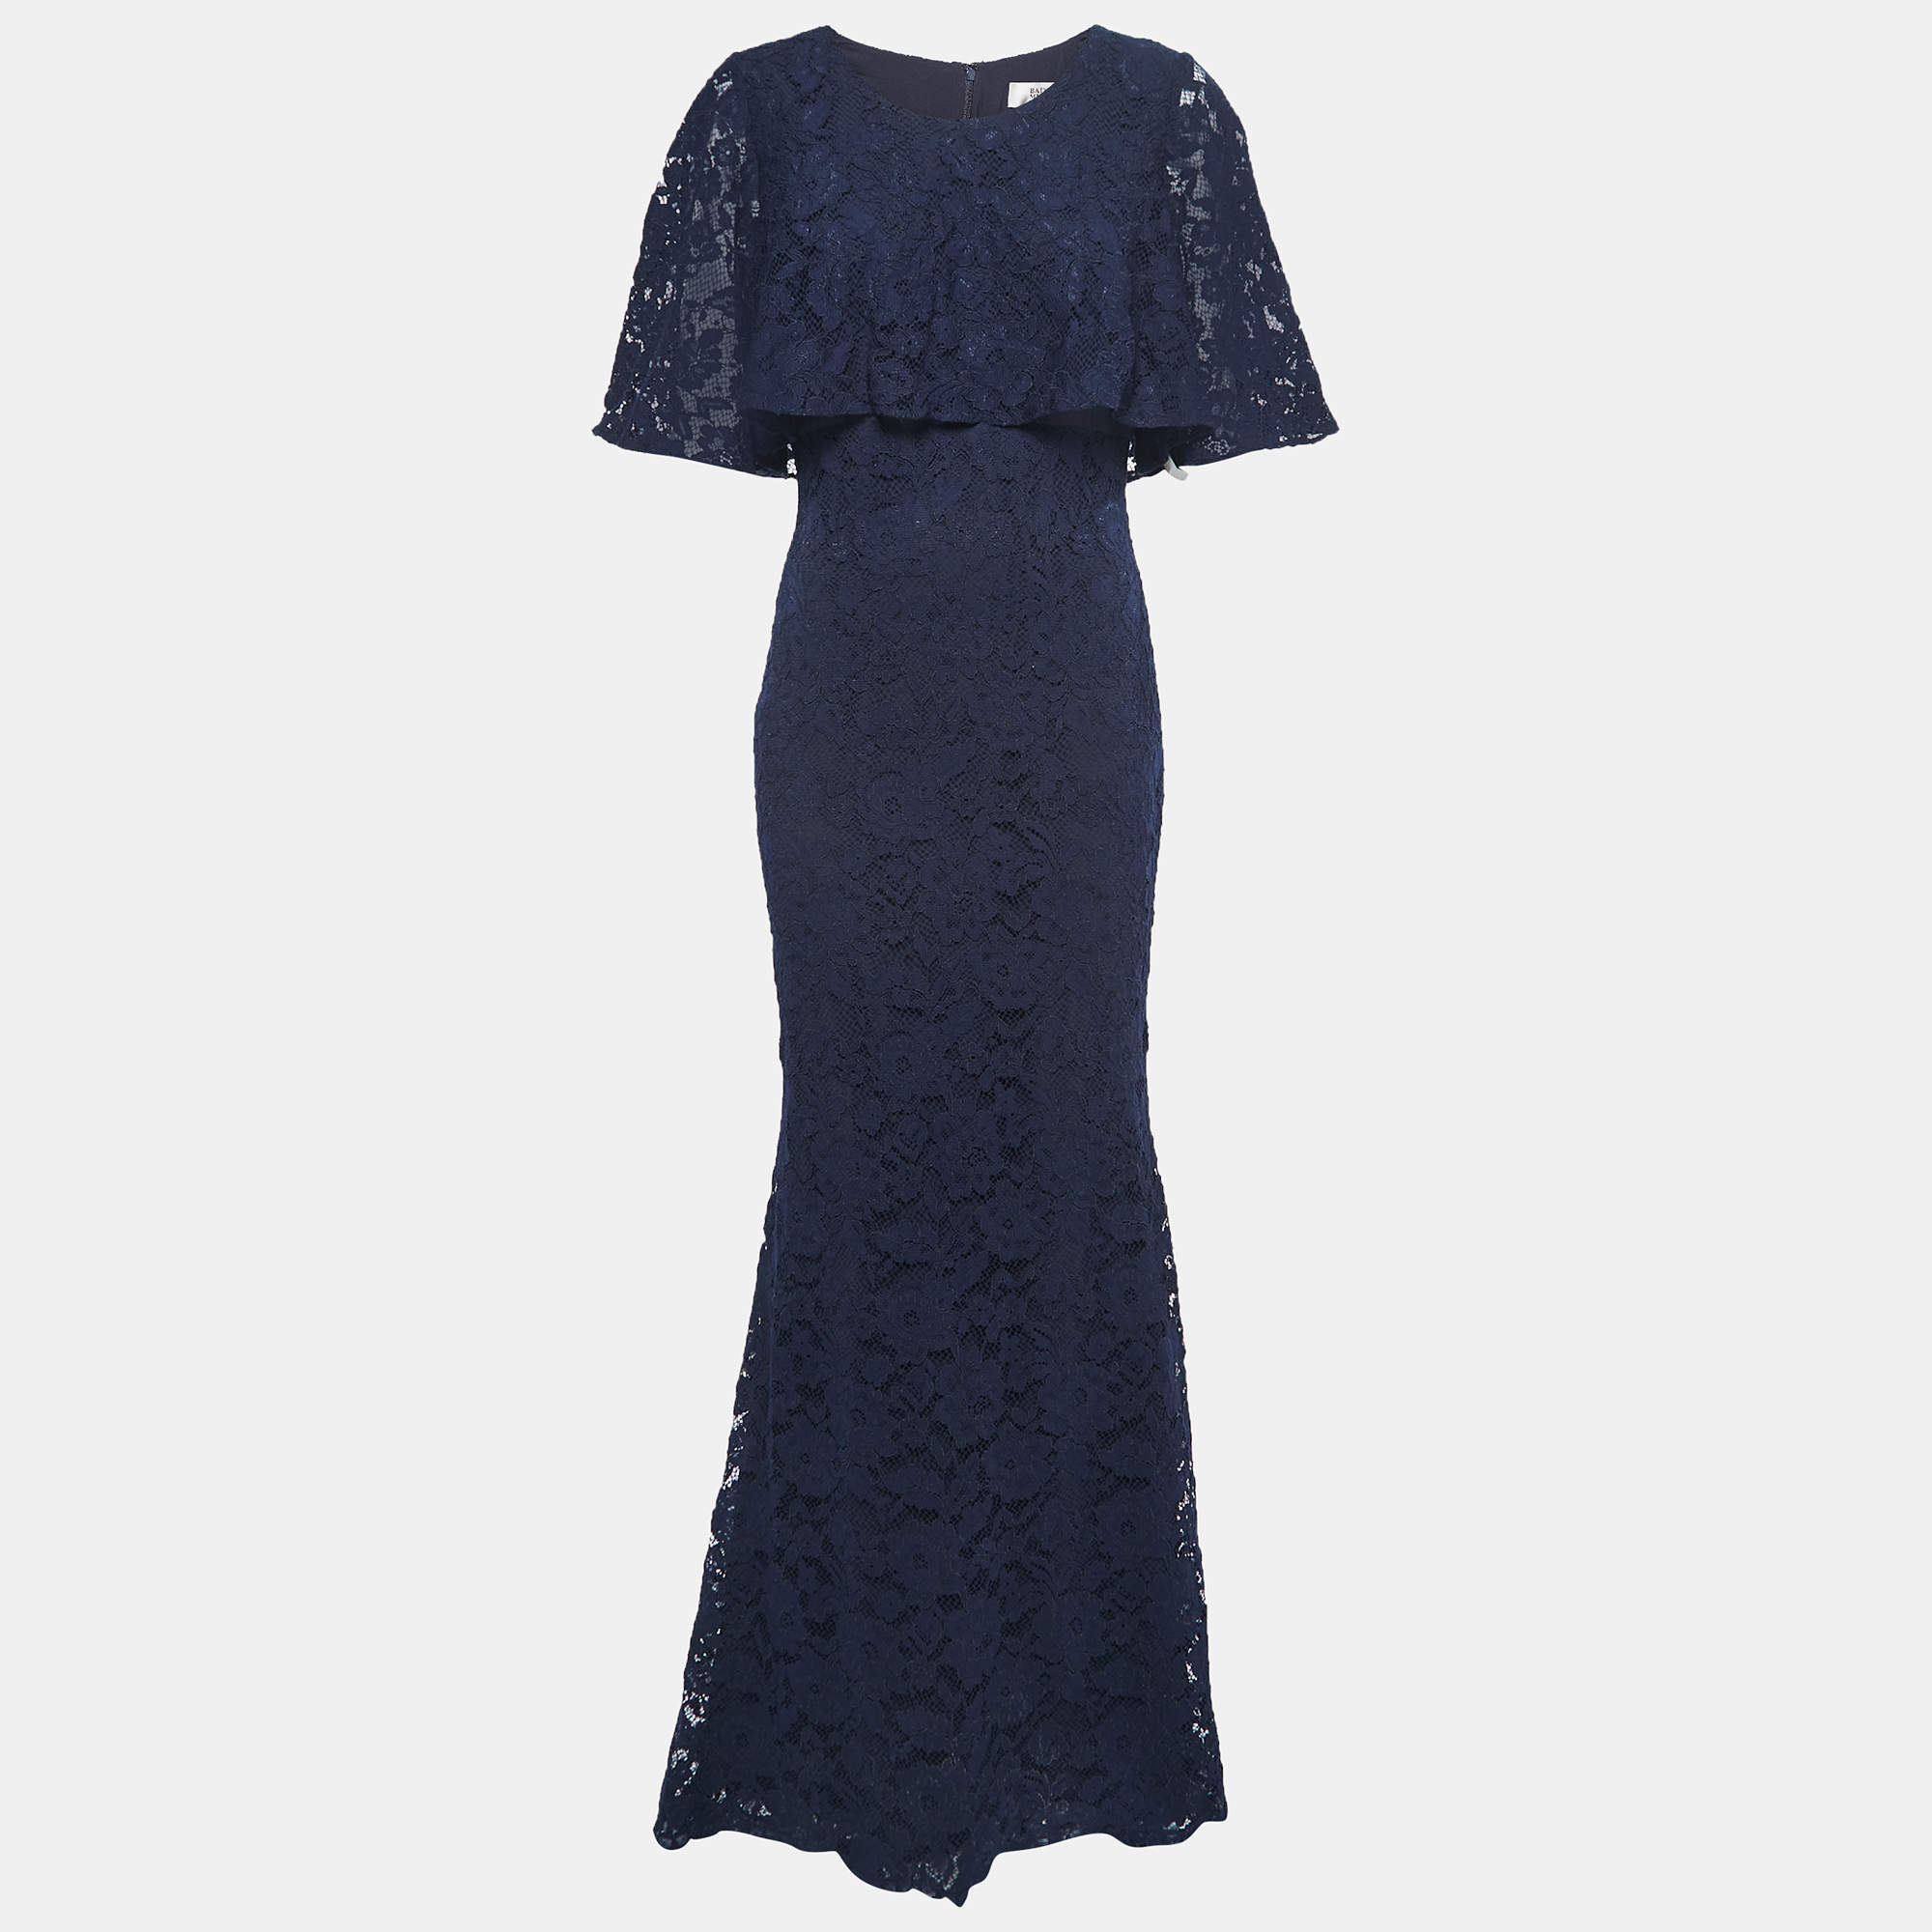 Badgley Mischka Navy Blue Lace Cape Gown S